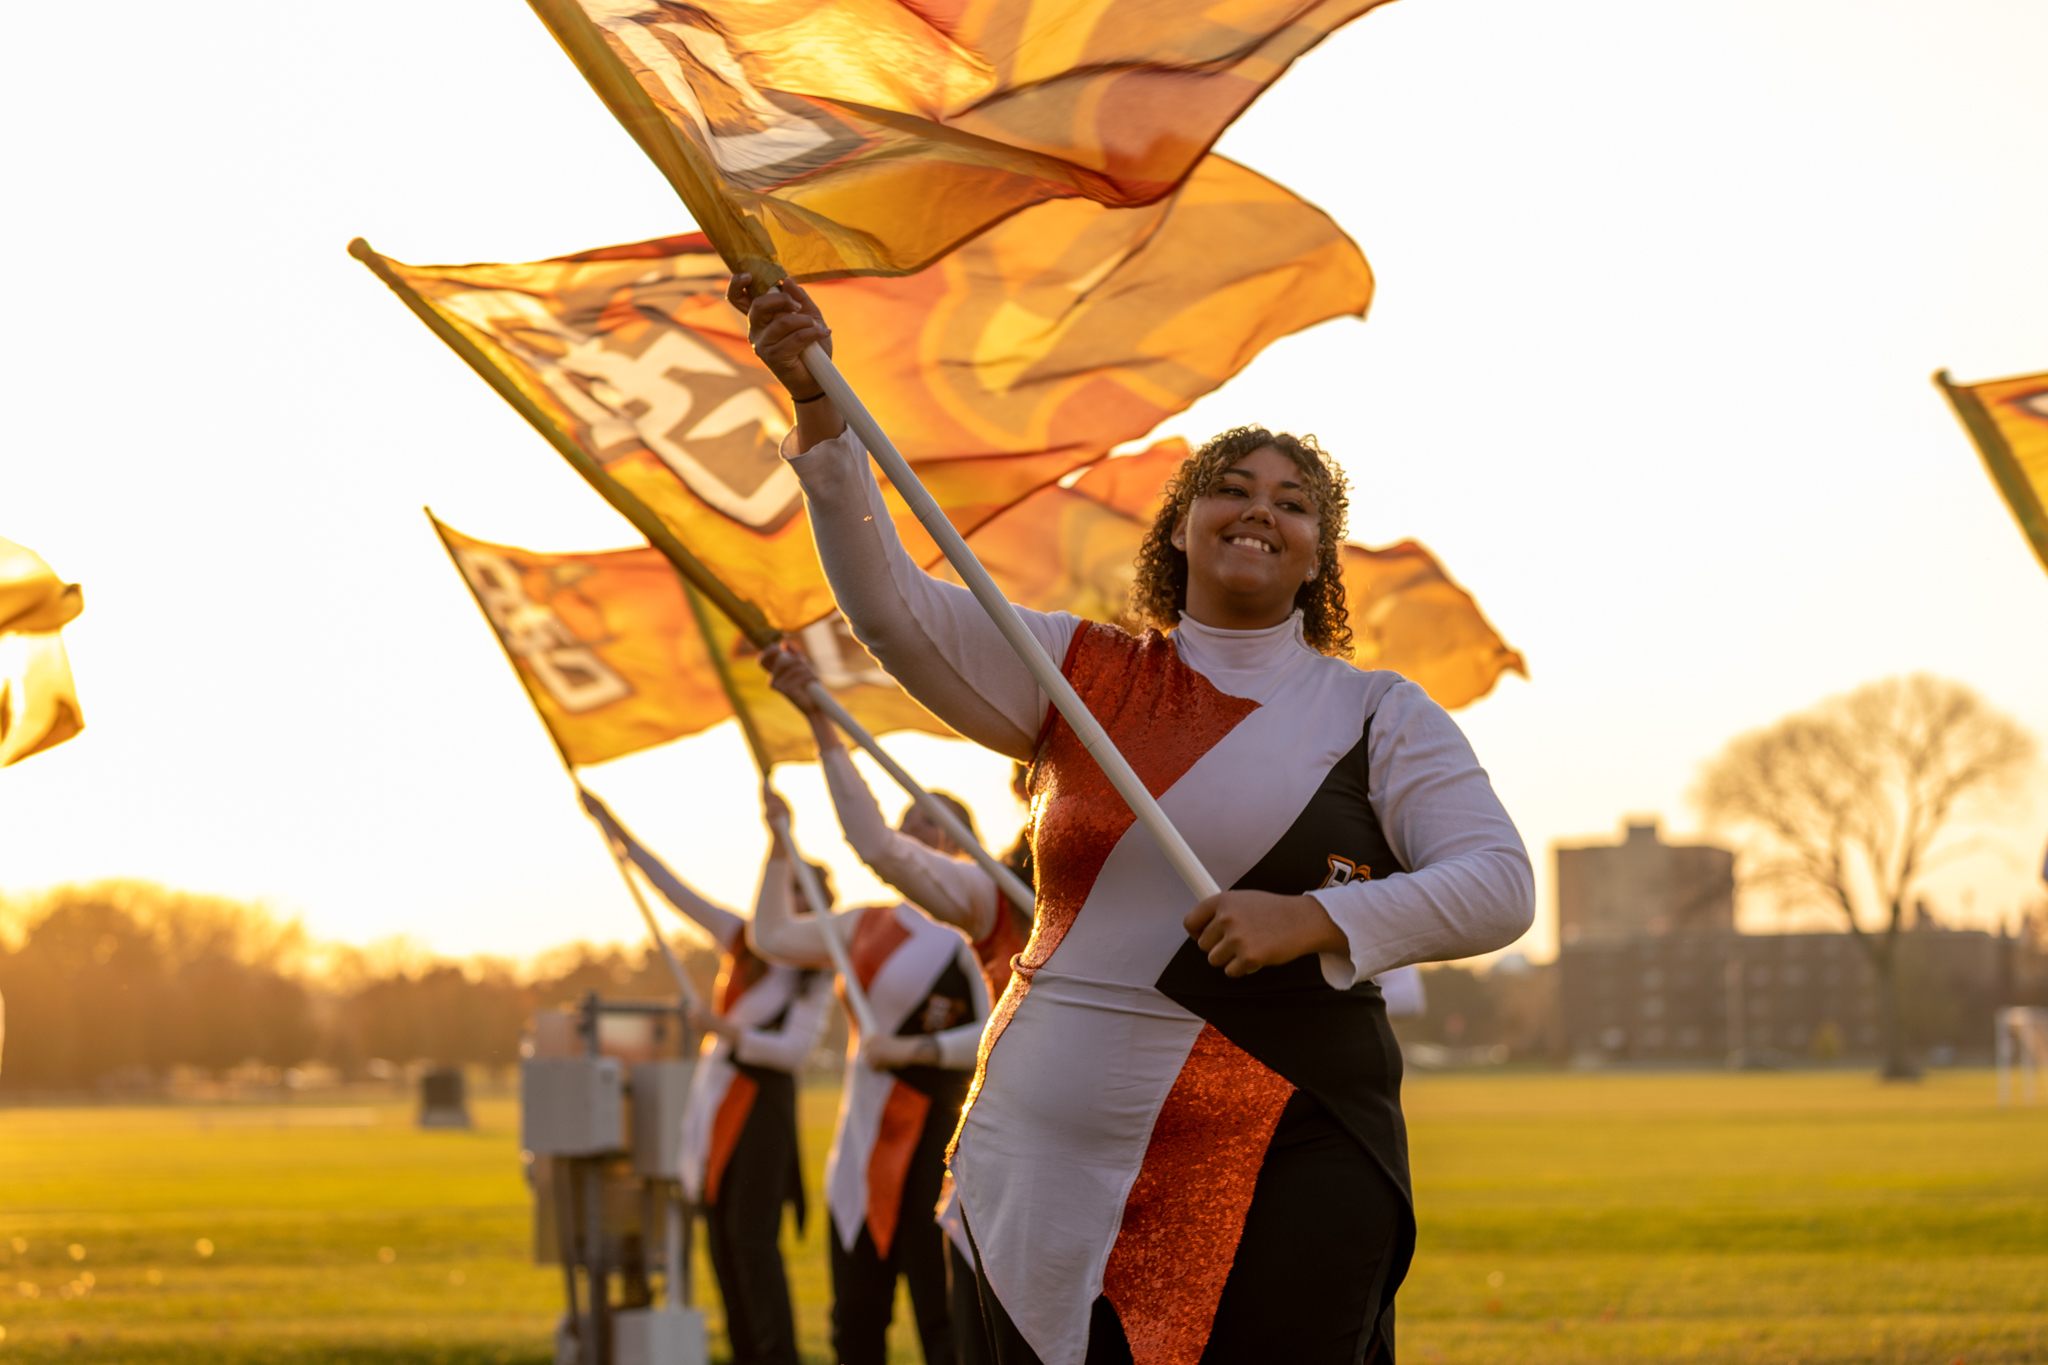 Falcon Marching Band Color Guard